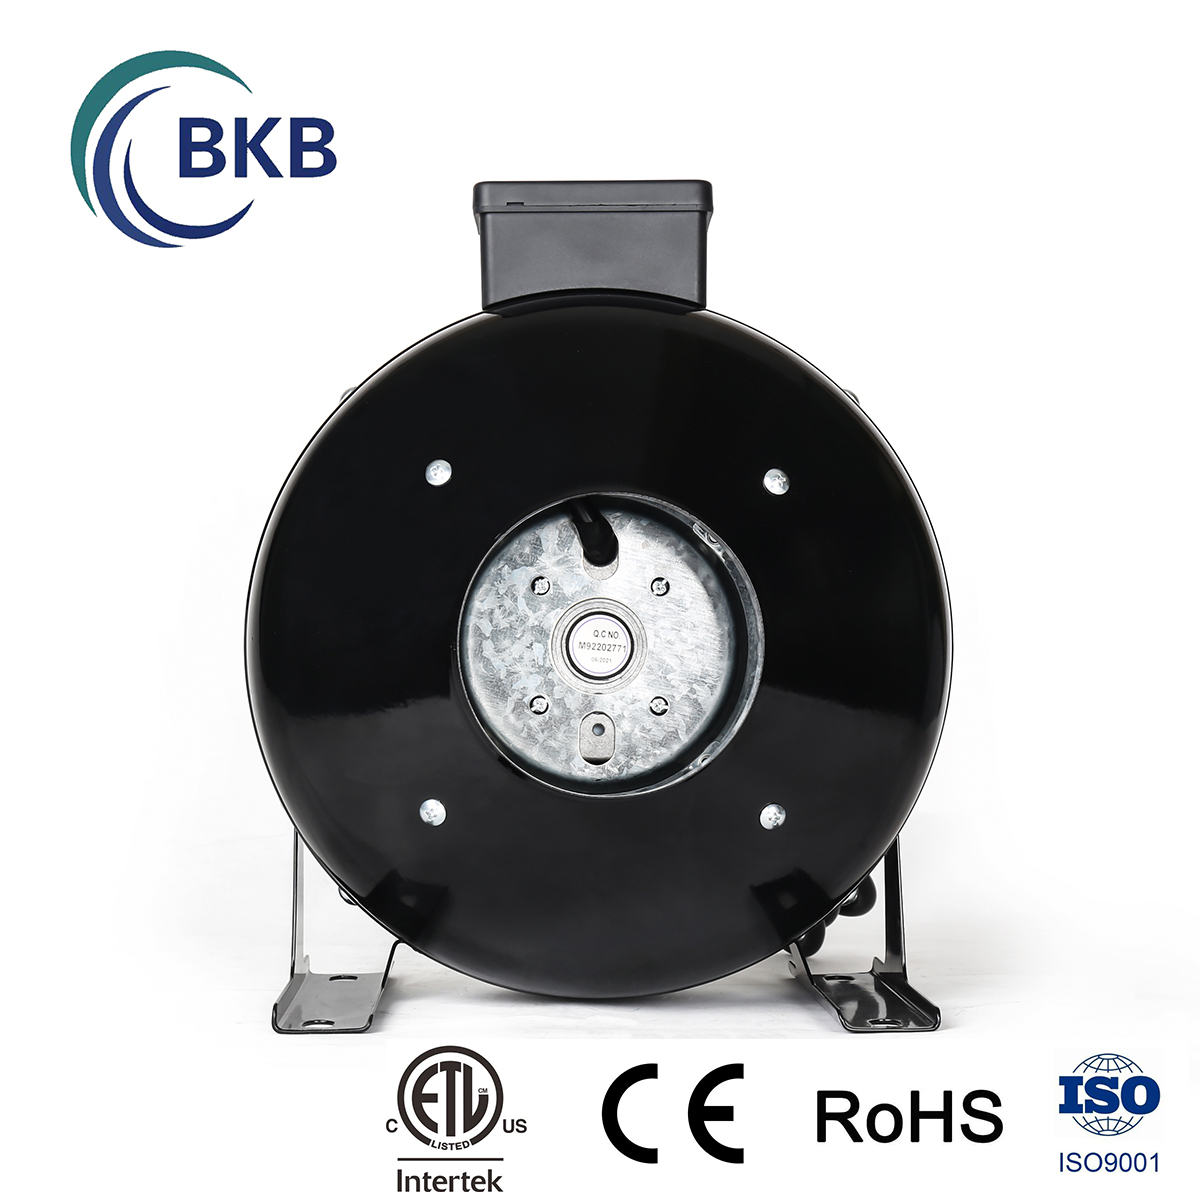 Precautions for use of centrifugal fan-SUNLIGHT BLOWER,Centrifugal Fans, Inline Fans,Motors,Backward curved centrifugal fans ,Forward curved centrifugal fans ,inlet fans, EC fans